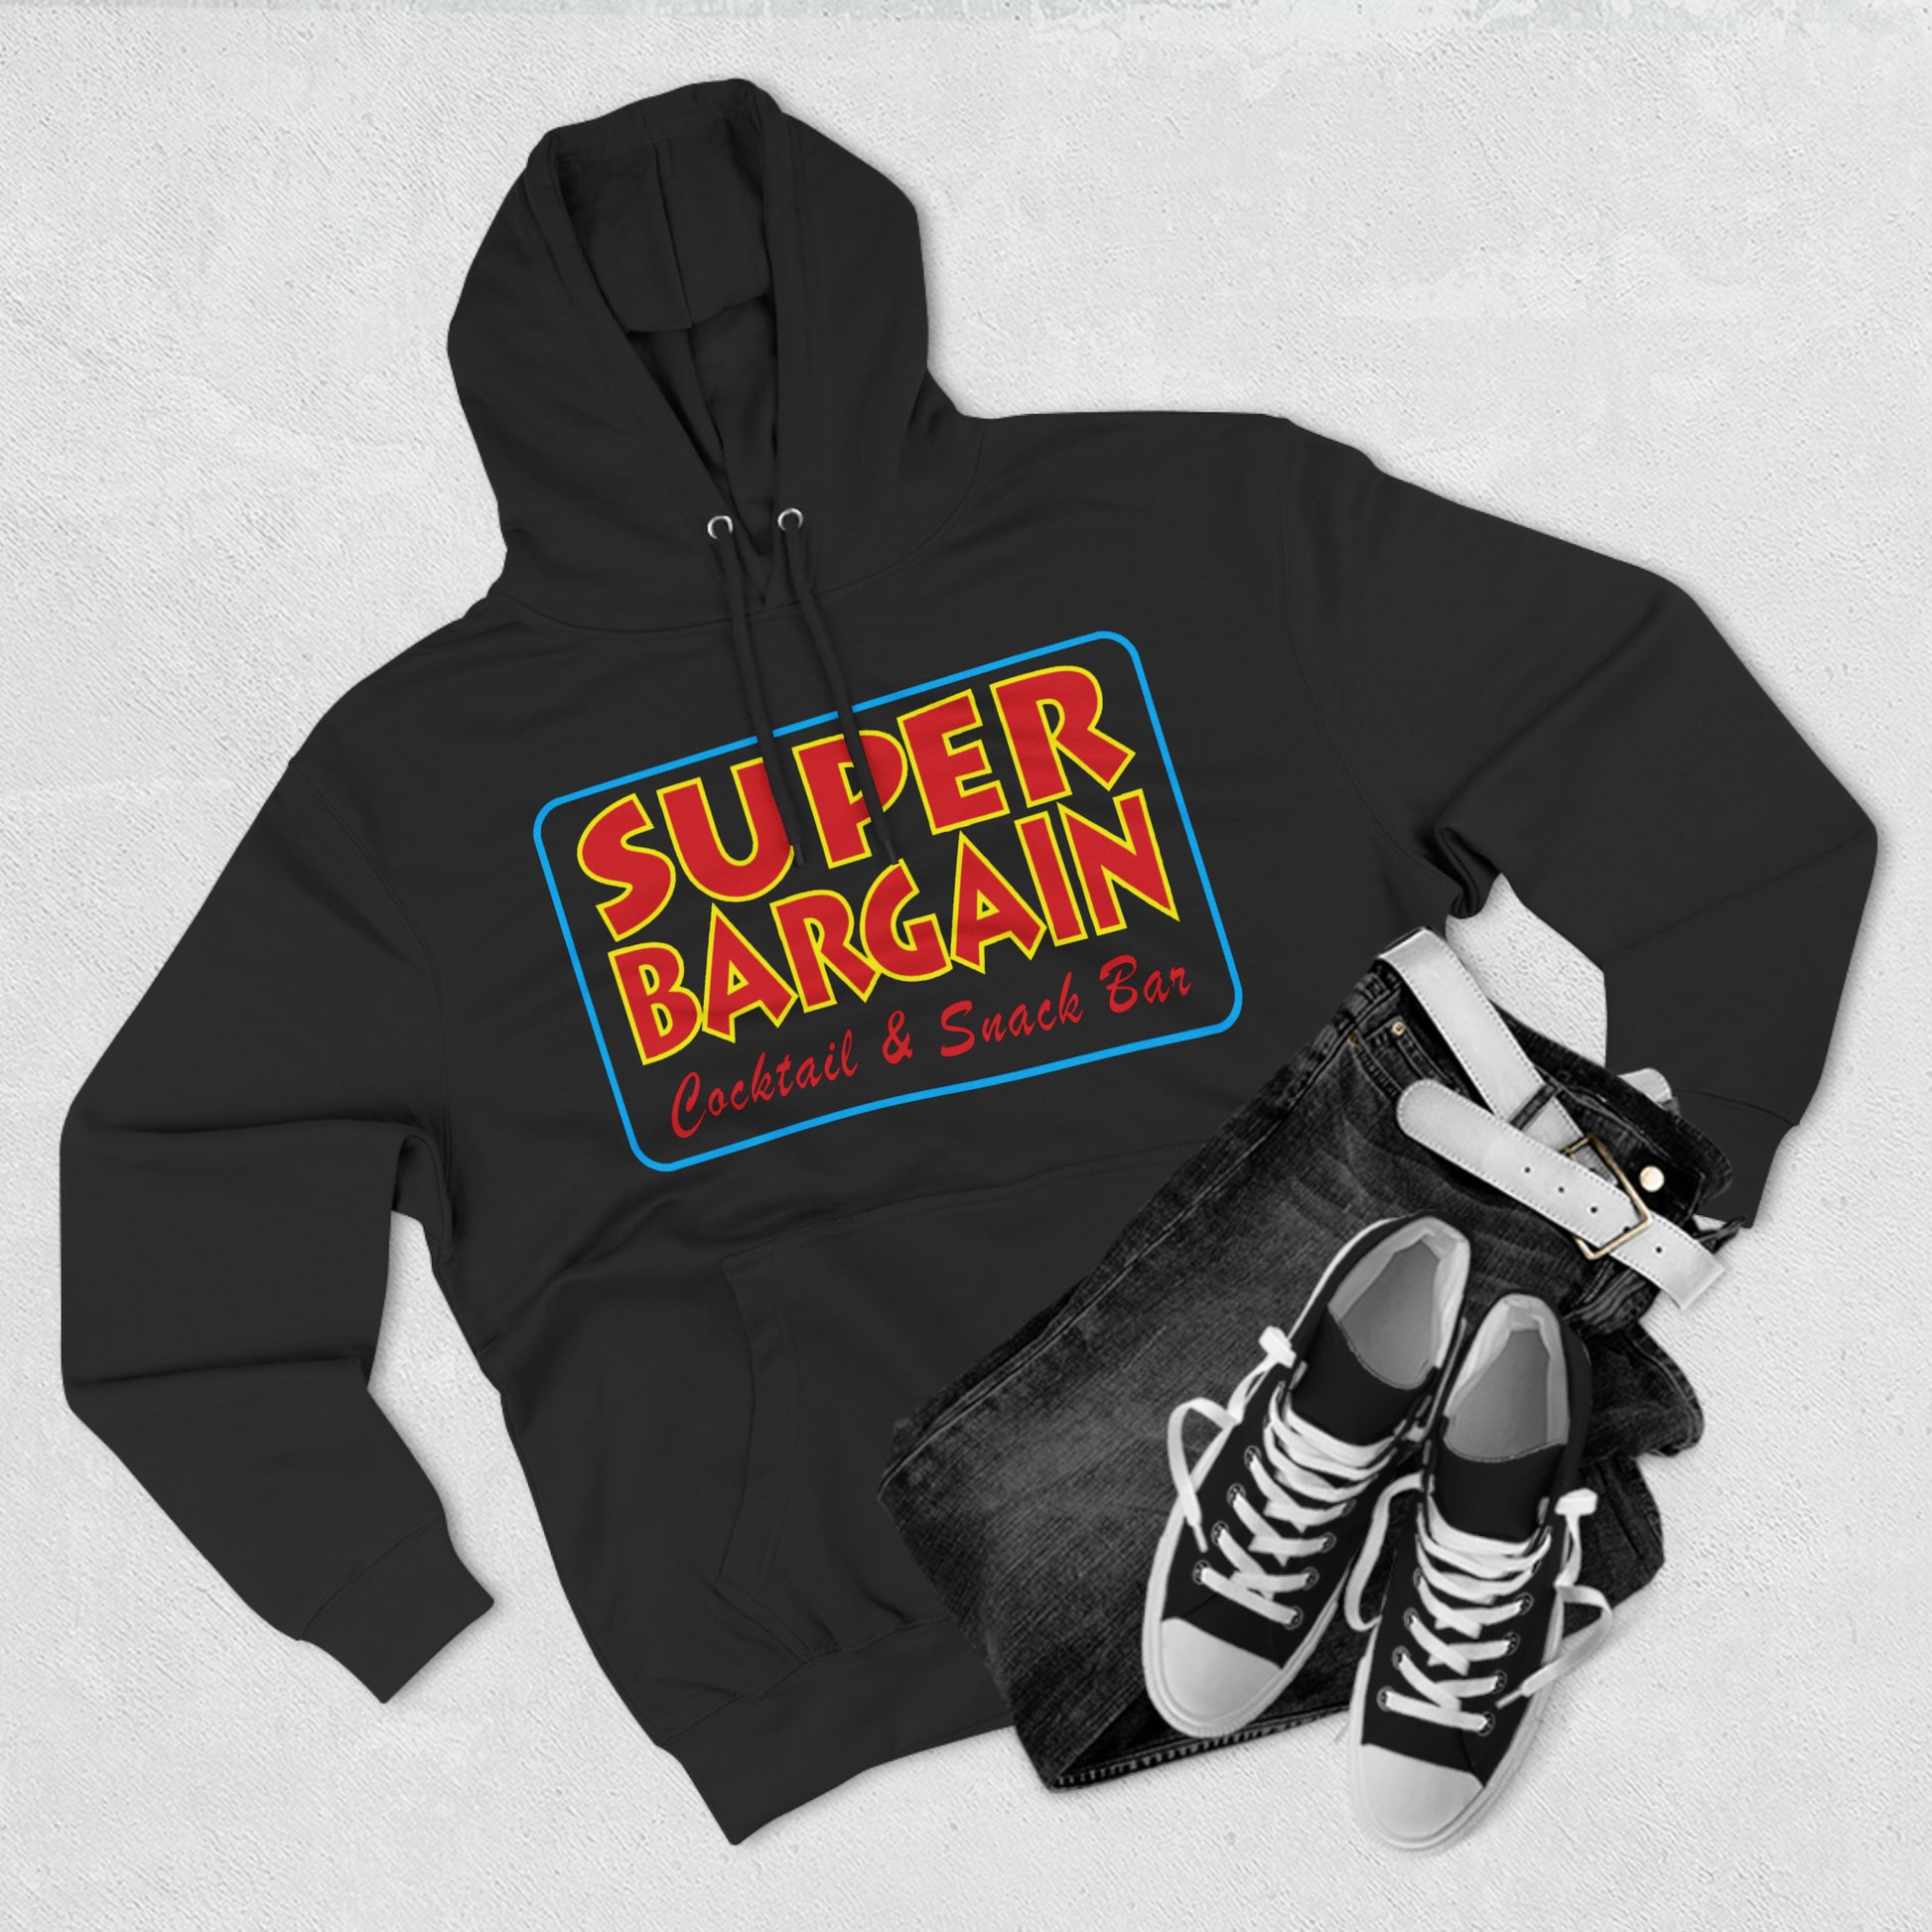 A black Unisex Premium Pullover Hoodie with "Cabbagetown, Toronto Super Bargain Cocktail & Snack Bar" logo, paired with jeans and sneakers, laid out on a textured white background.